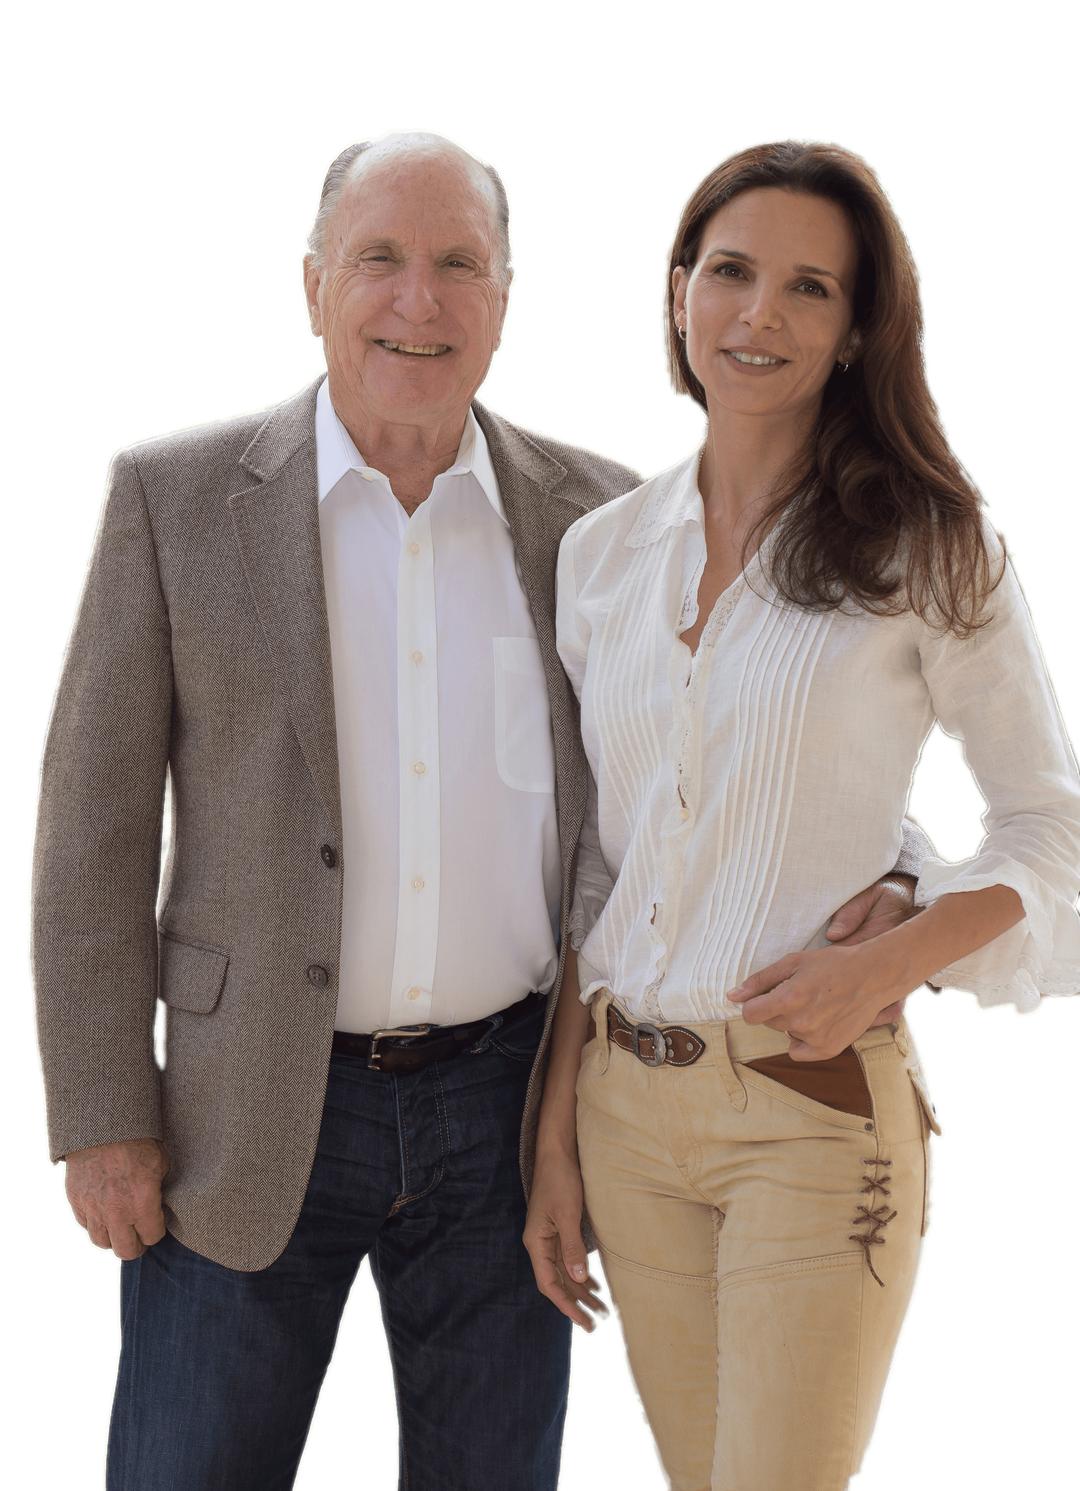 Robert Duvall With His Wife Luciana Pedraza png transparent